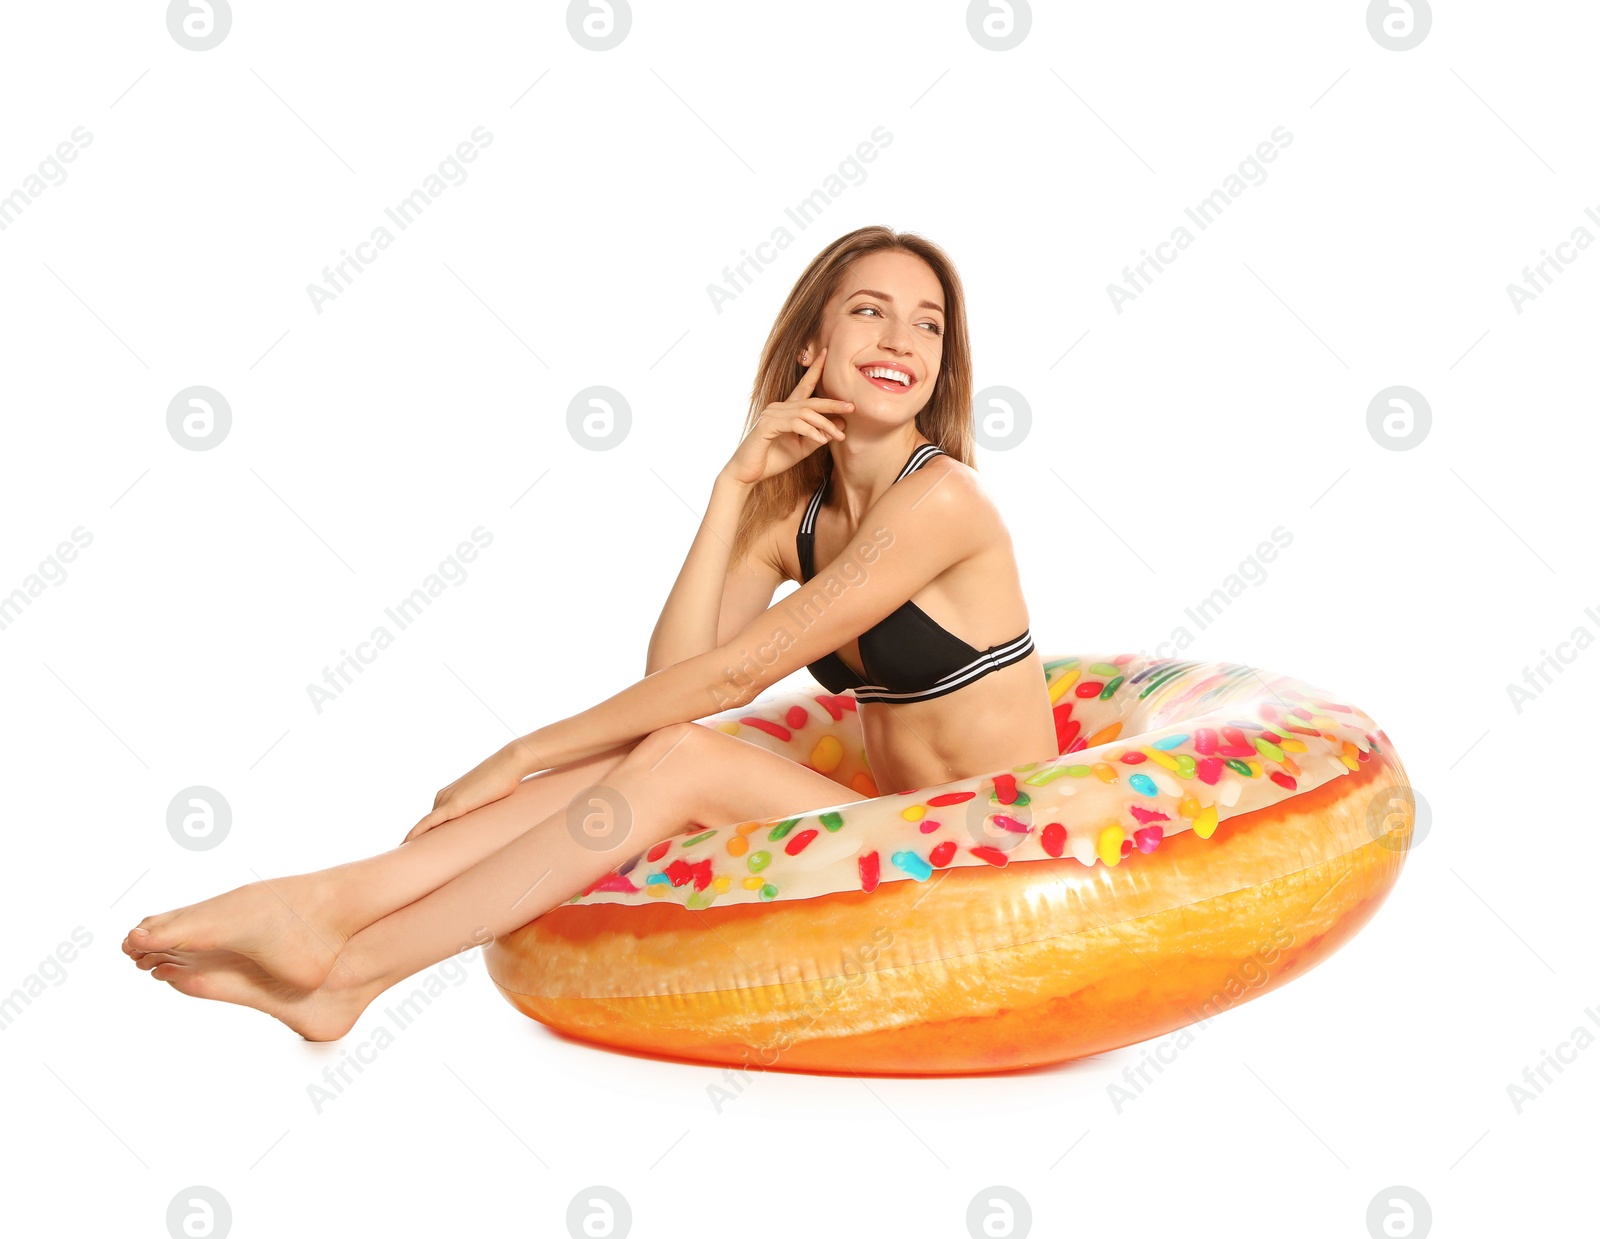 Photo of Beautiful young woman in stylish bikini with doughnut inflatable ring on white background